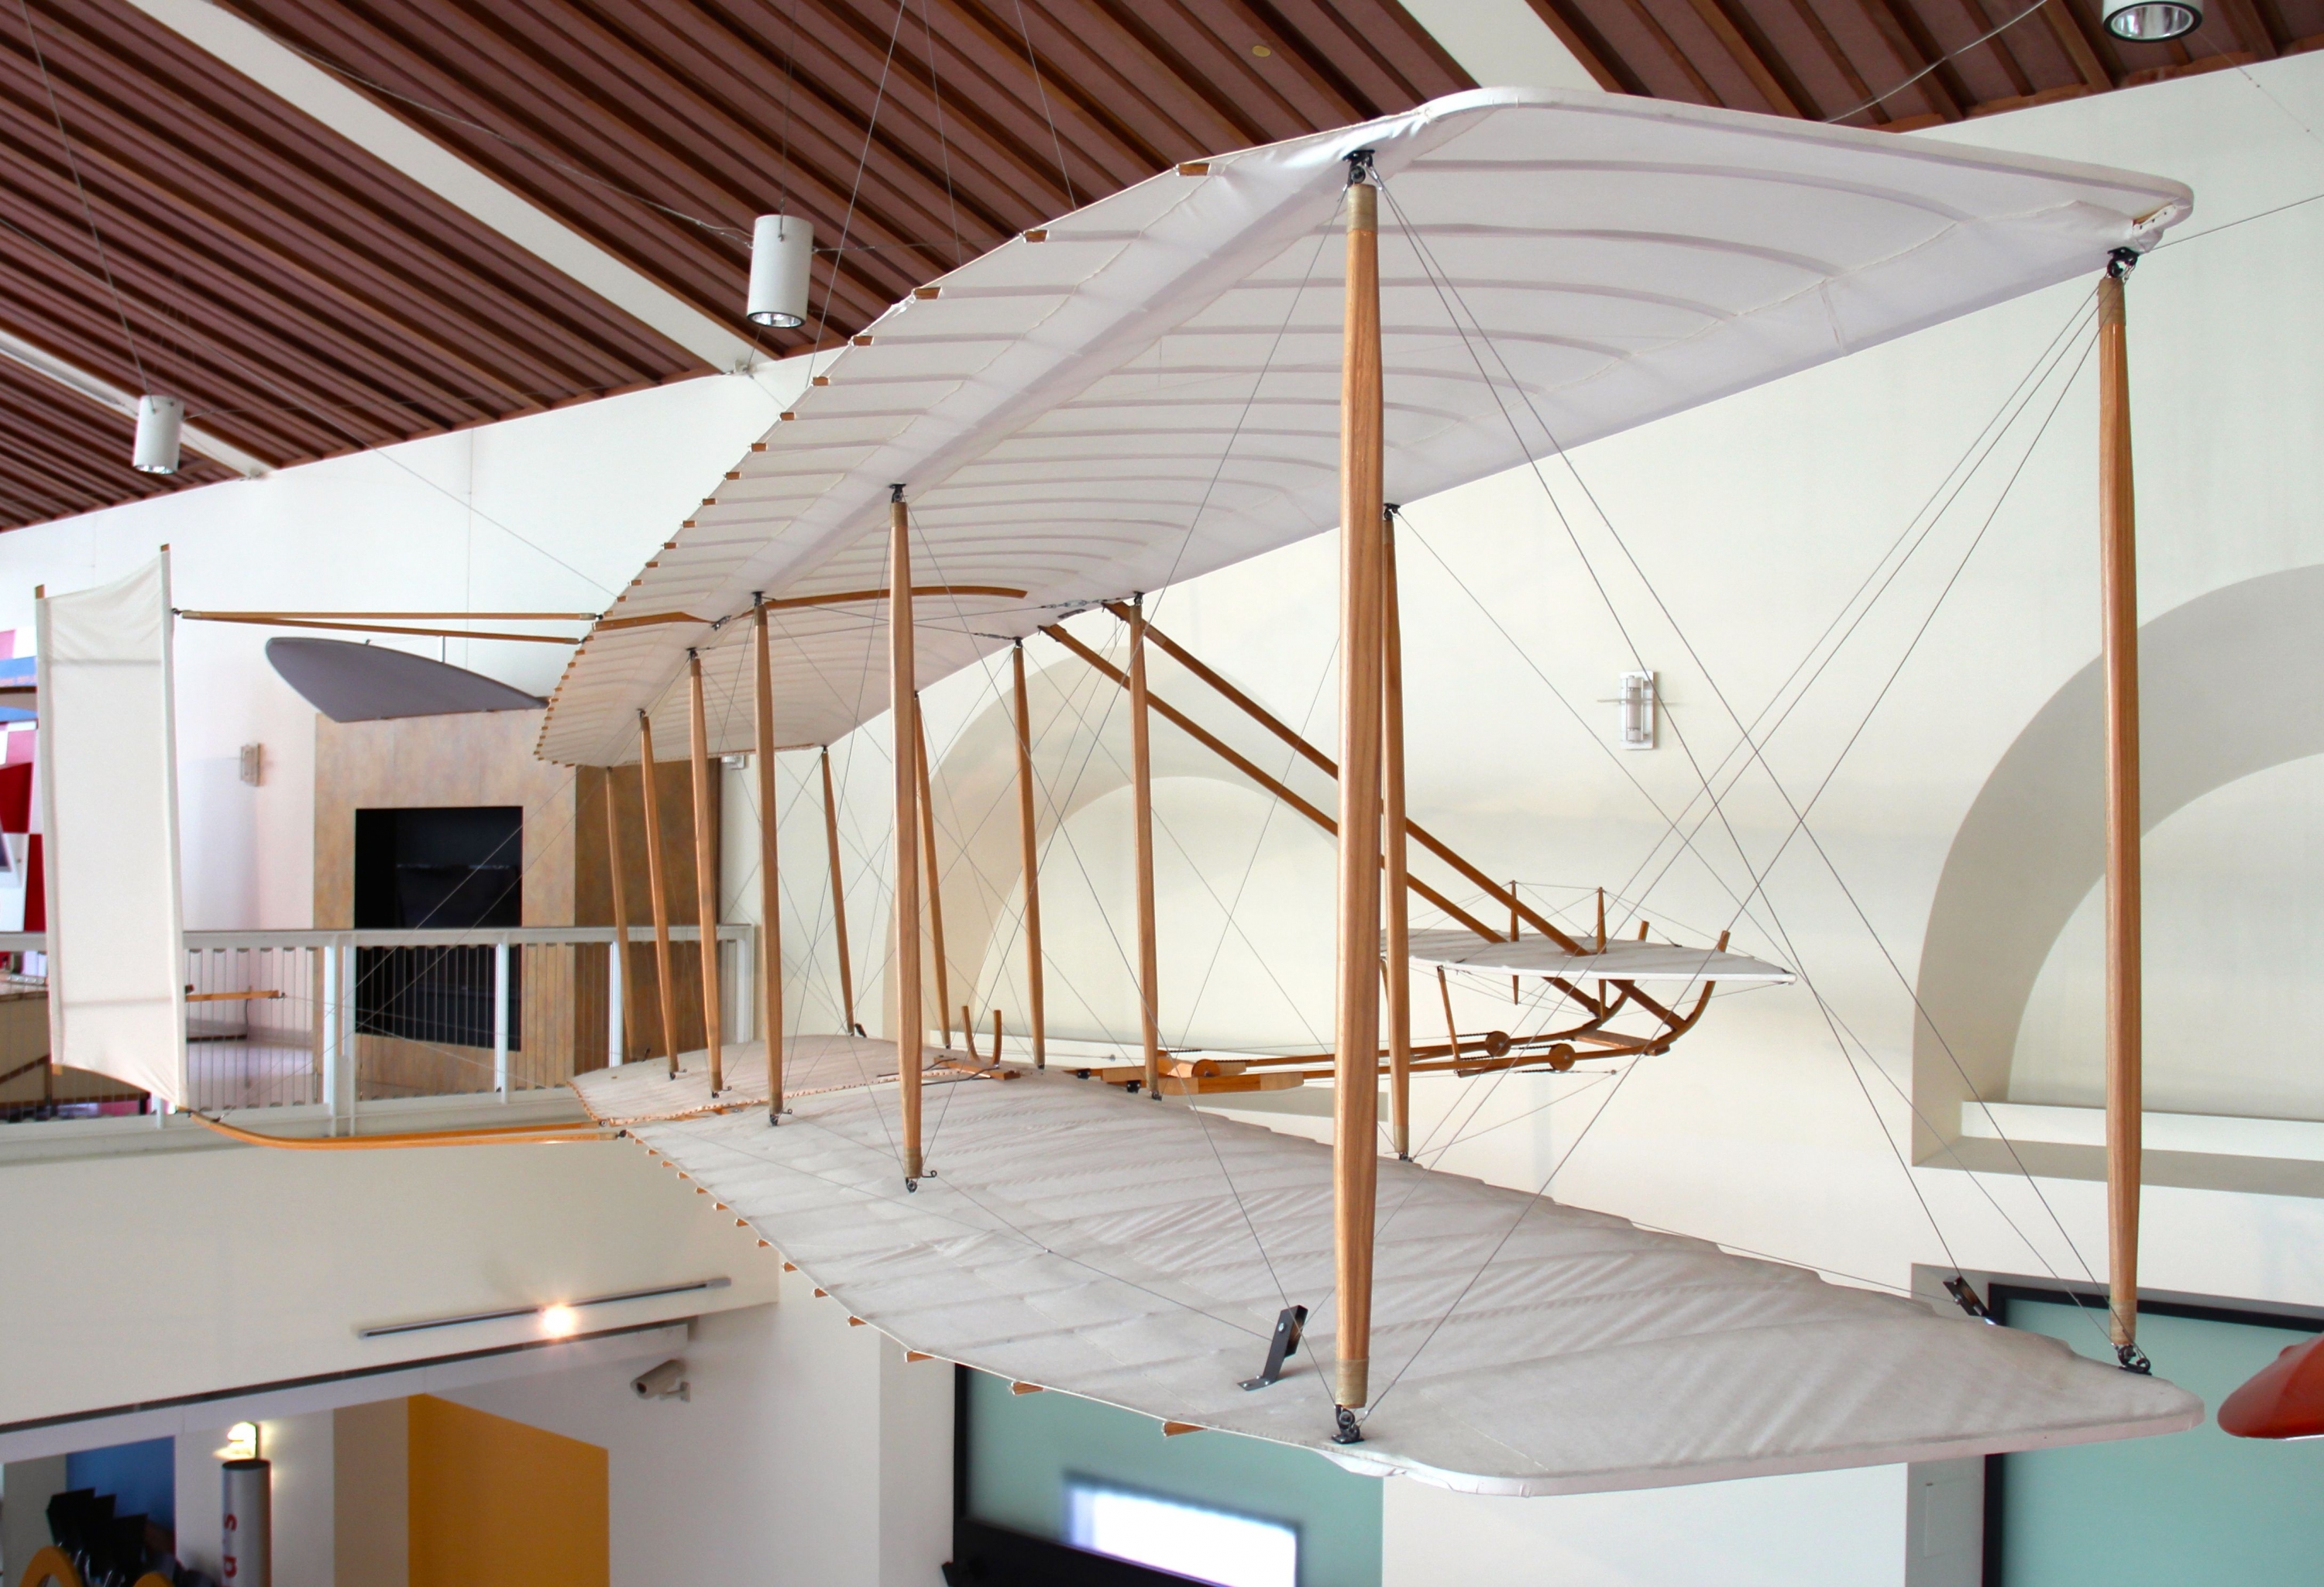 1902 Wright Glider on display at the Science Center